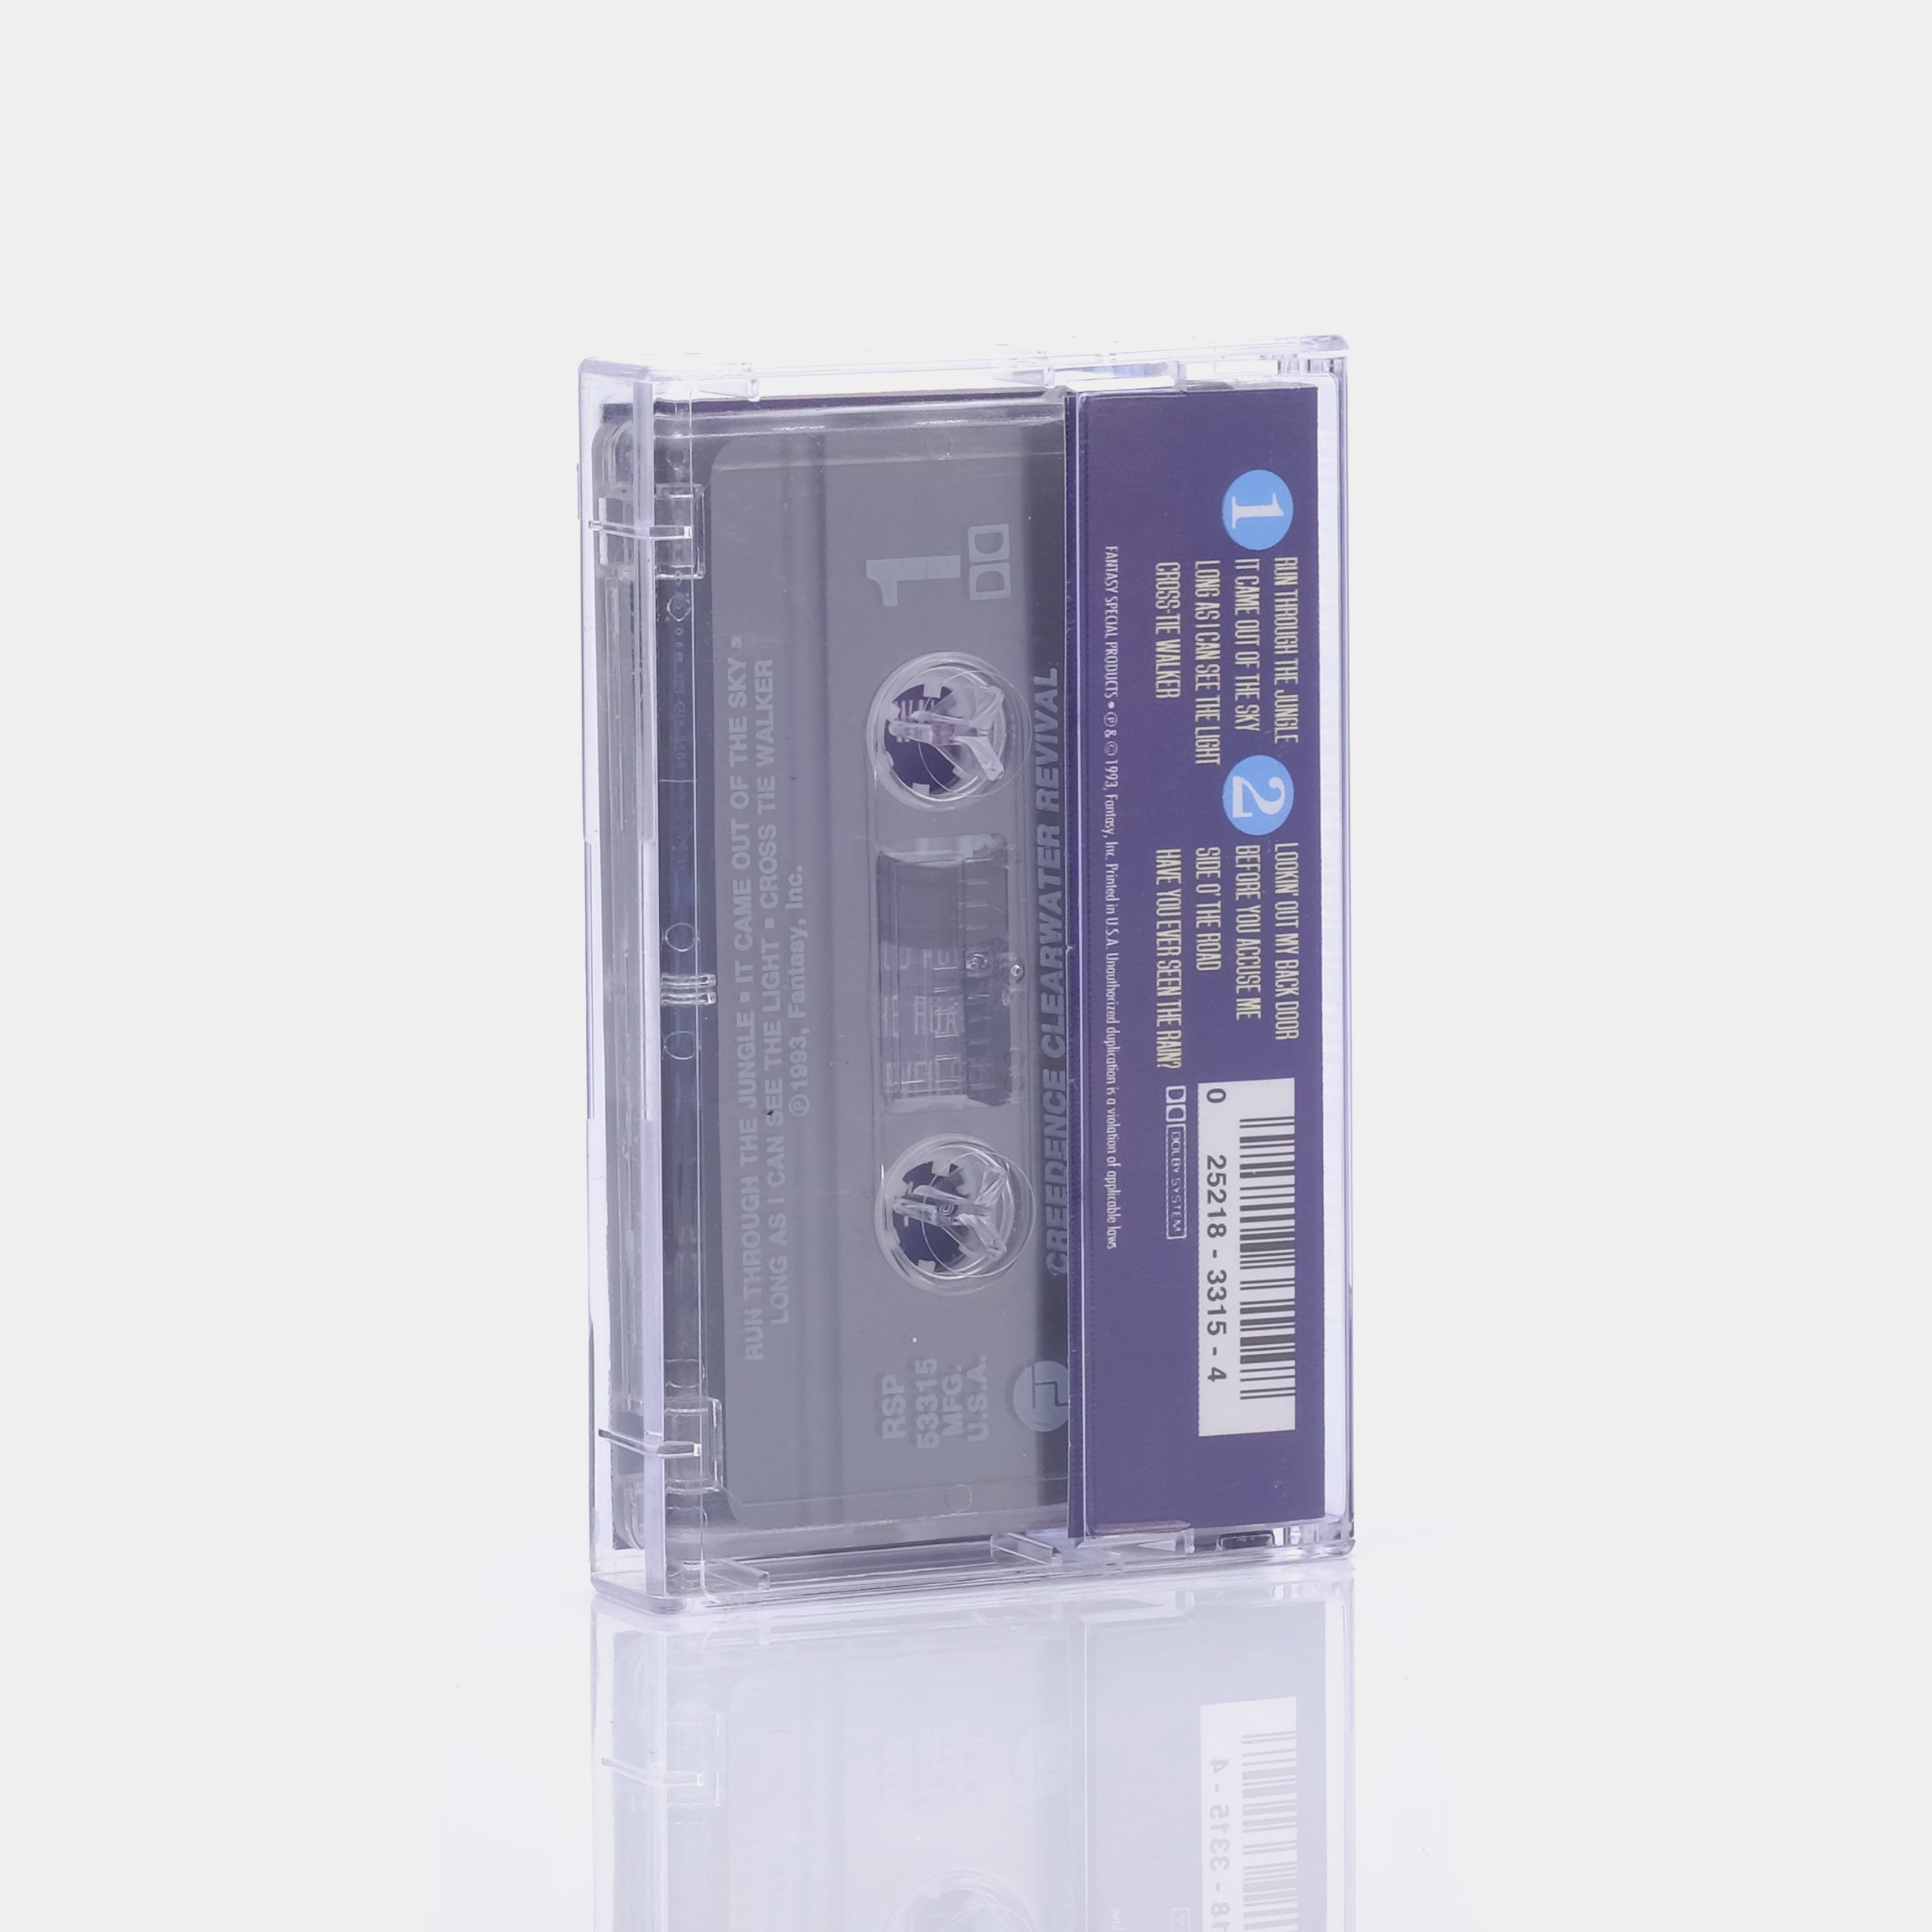 Creedence Clearwater Revival - Have You Ever Seen The Rain? Cassette Tape